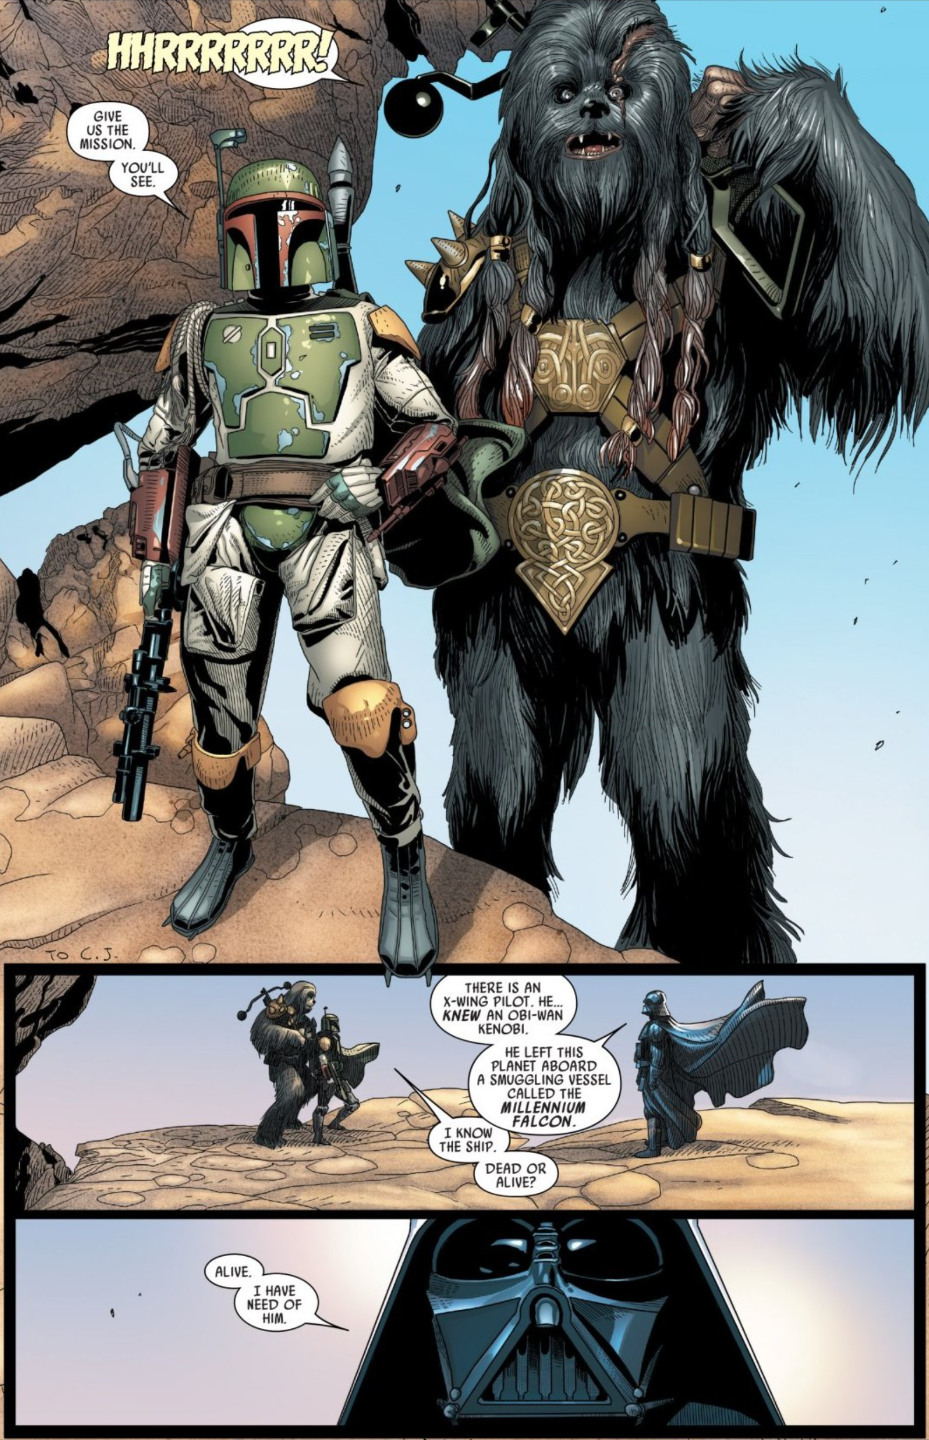 THE BOOK OF BOBA FETT [Episodes 1-3 Review]: Throne Deaf.